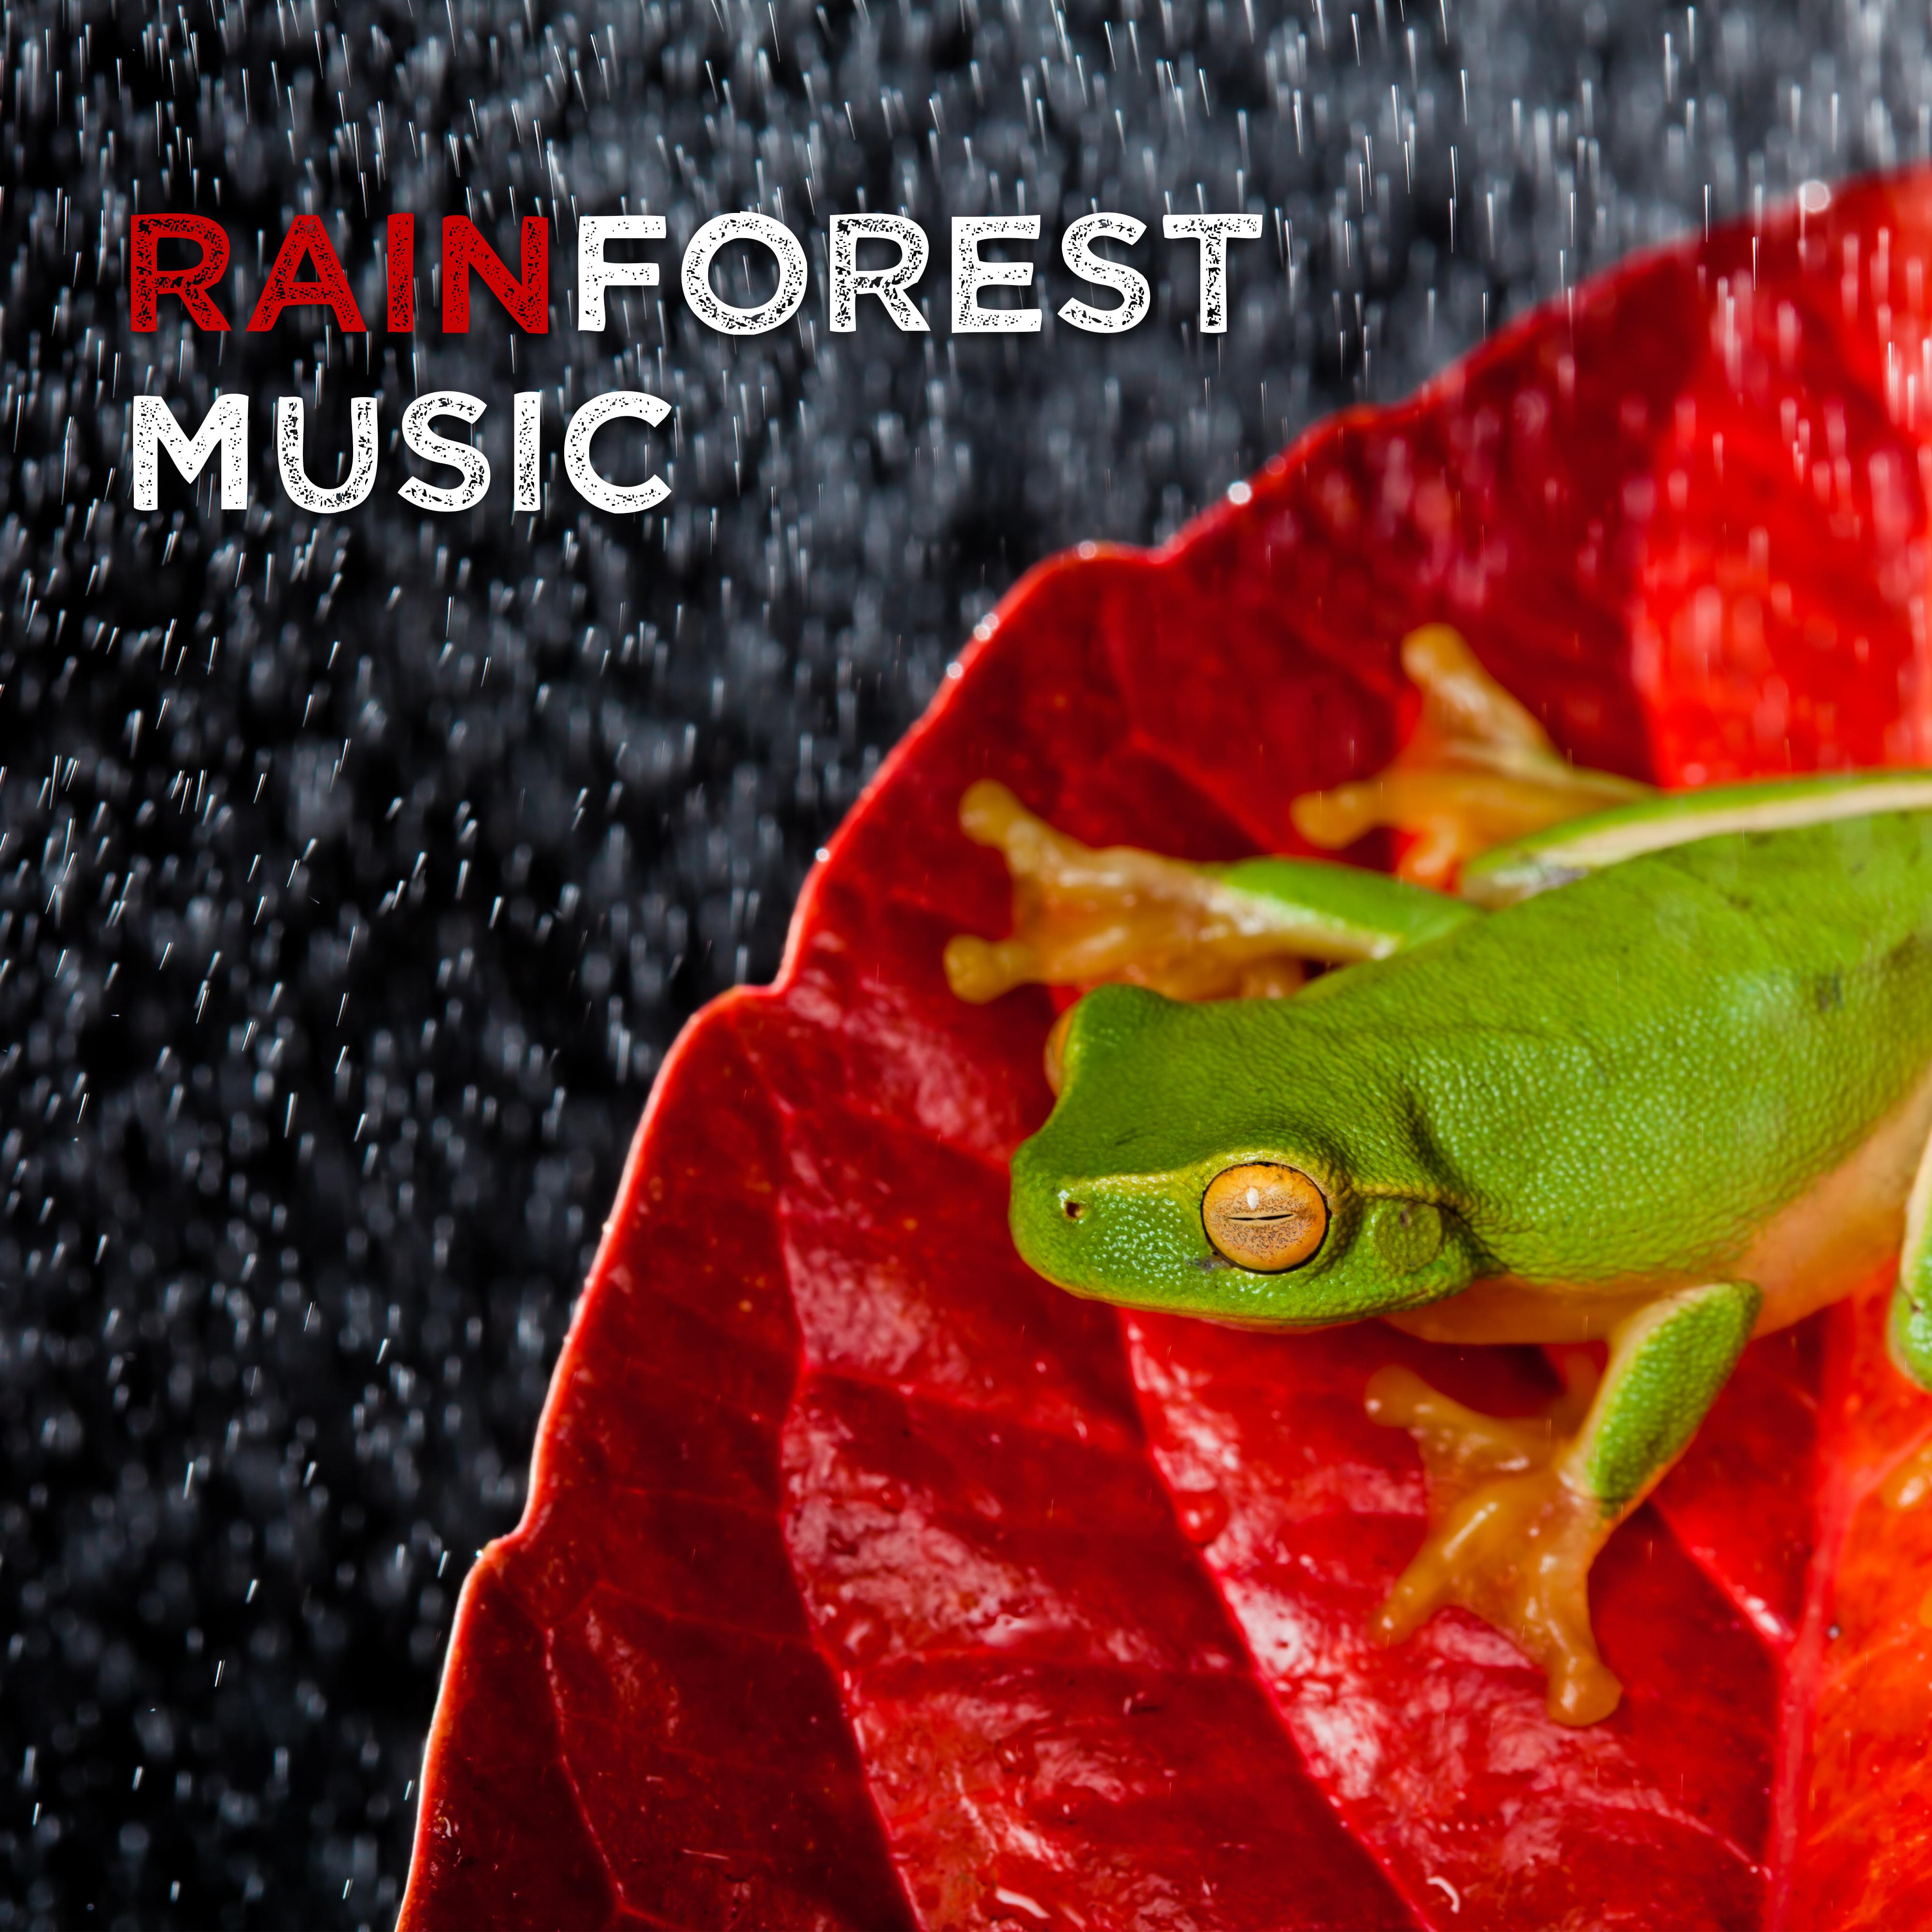 Rainforest Music: Nature Sound Relaxation, Jungle Sounds, Waterscapes, Bird Songs to Sleep, Nature Meditation